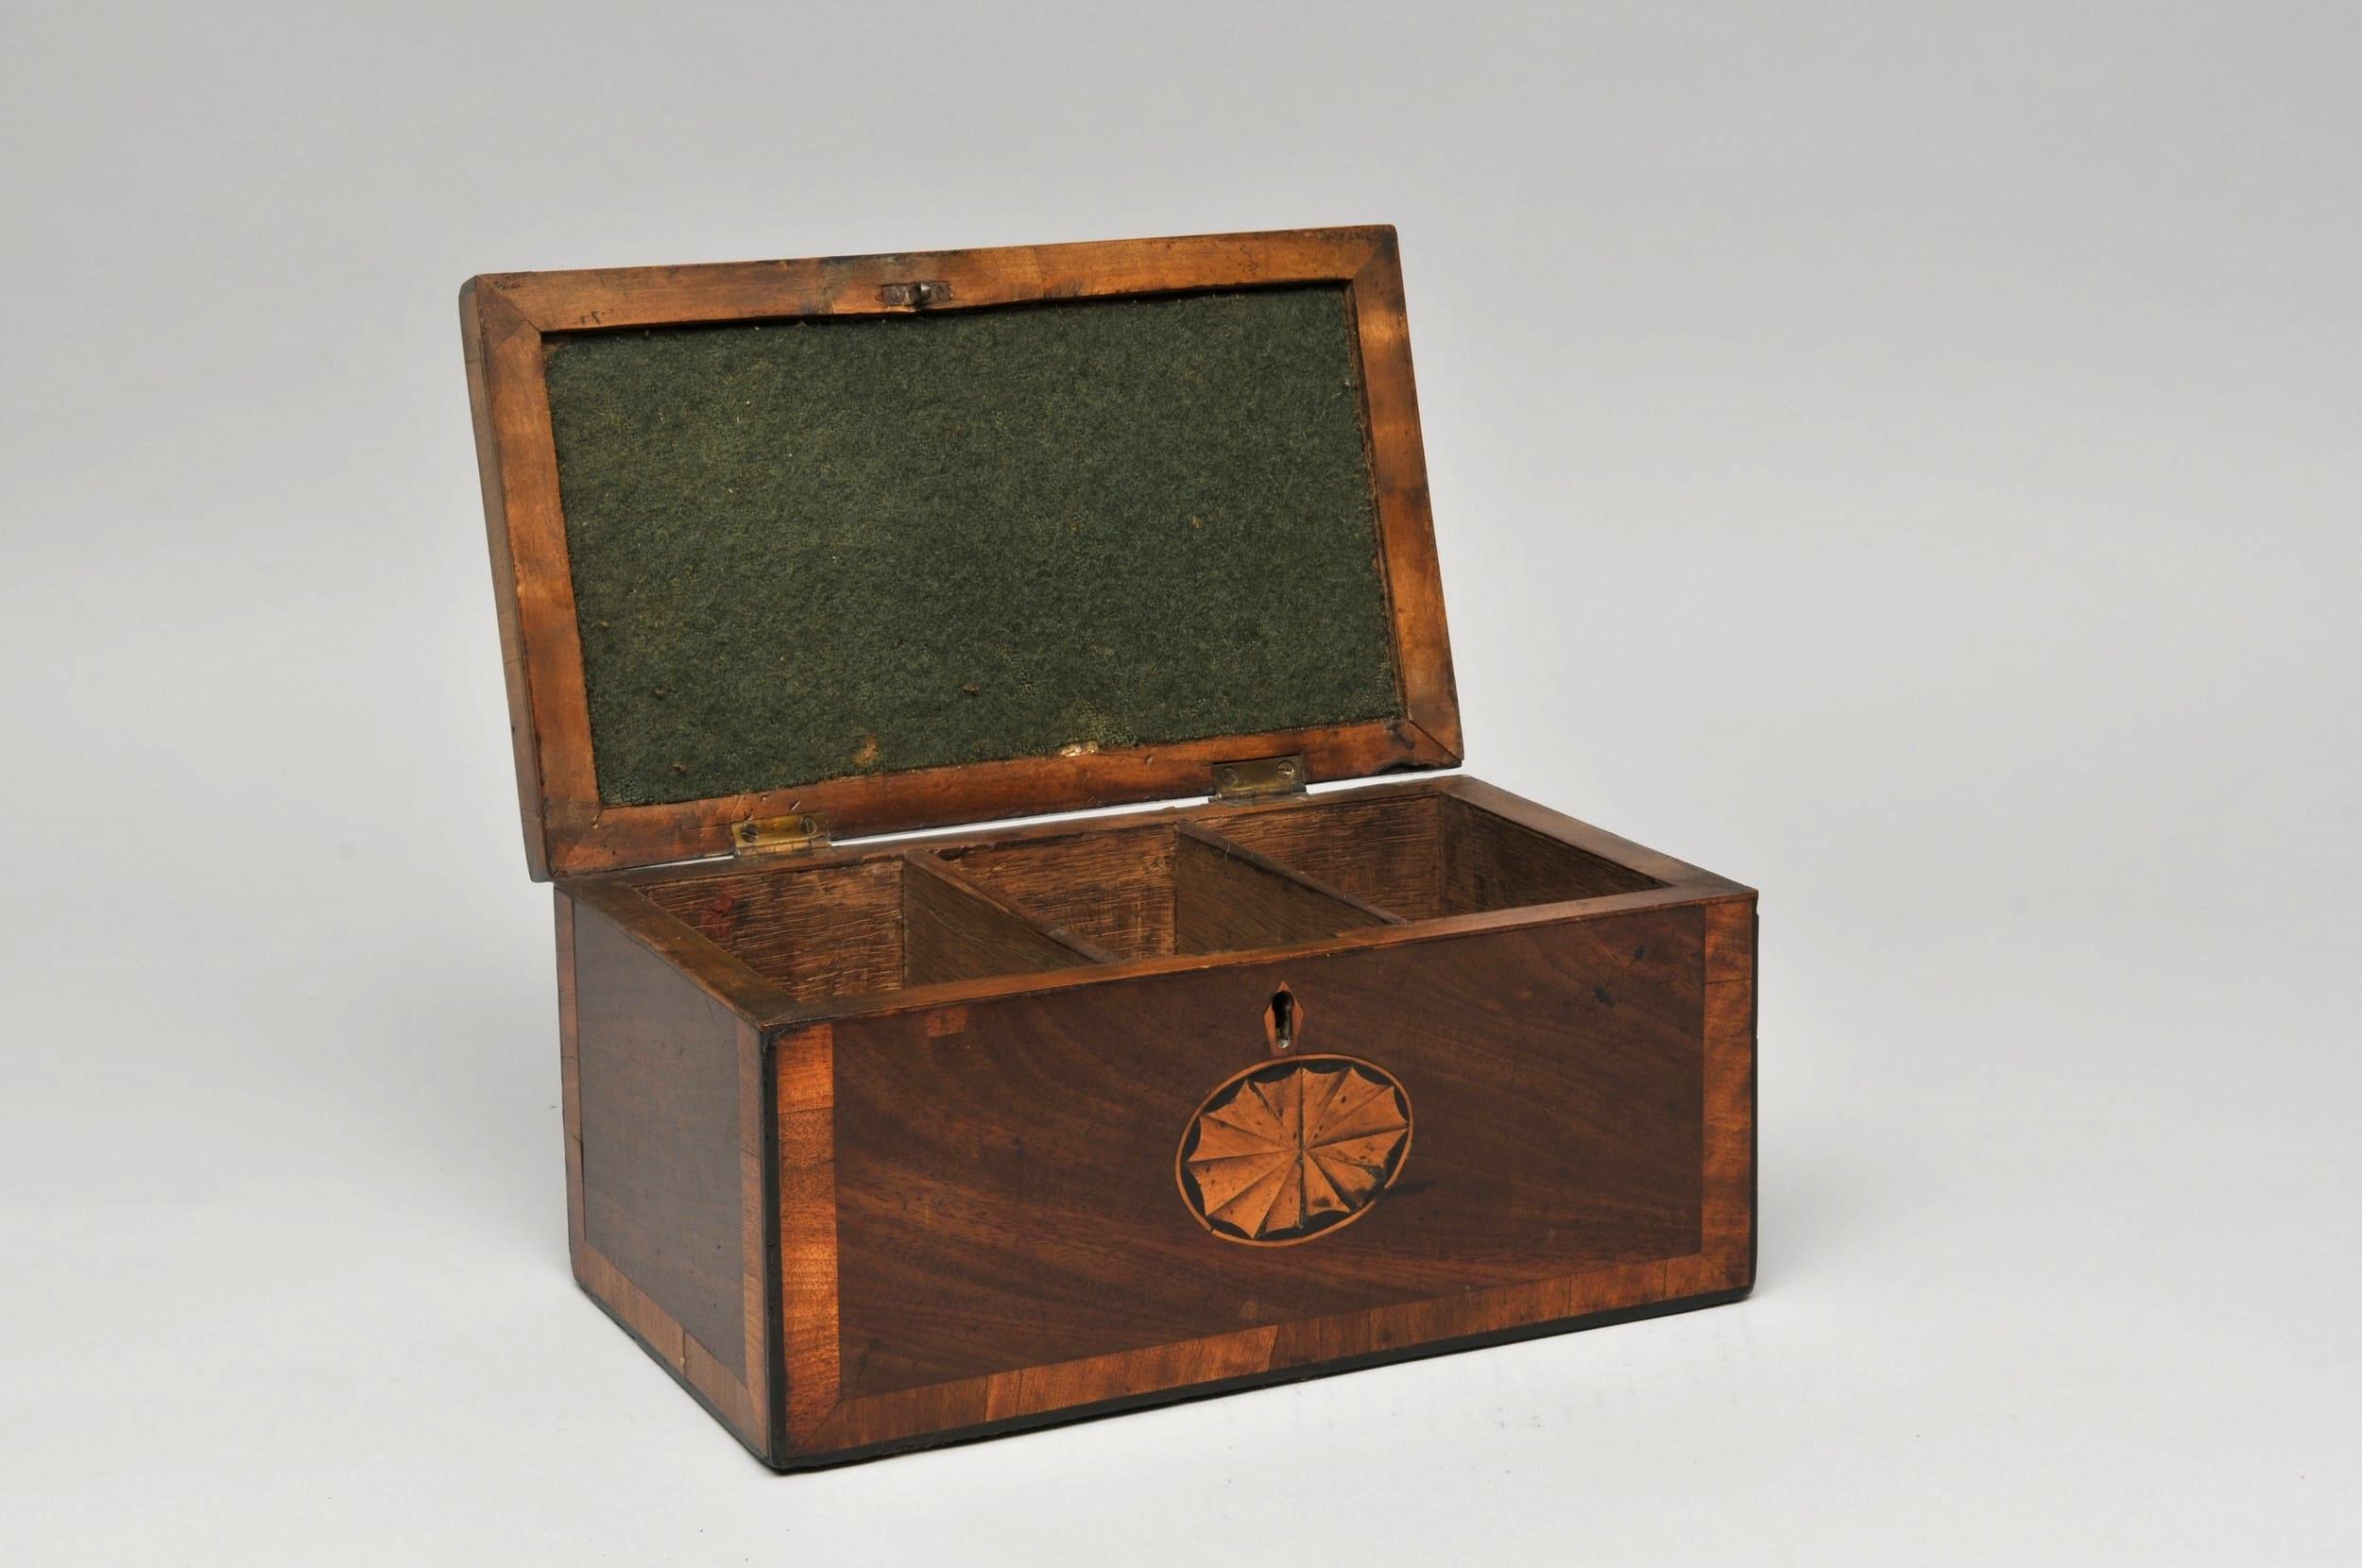 Period tea caddy

Measures: Height 13cm, width 27cm

A beautiful period tea caddy with cross banding and star inlay.

Although wooden tea caddies were made early in the 18th century, it is not until the second half of the century that they